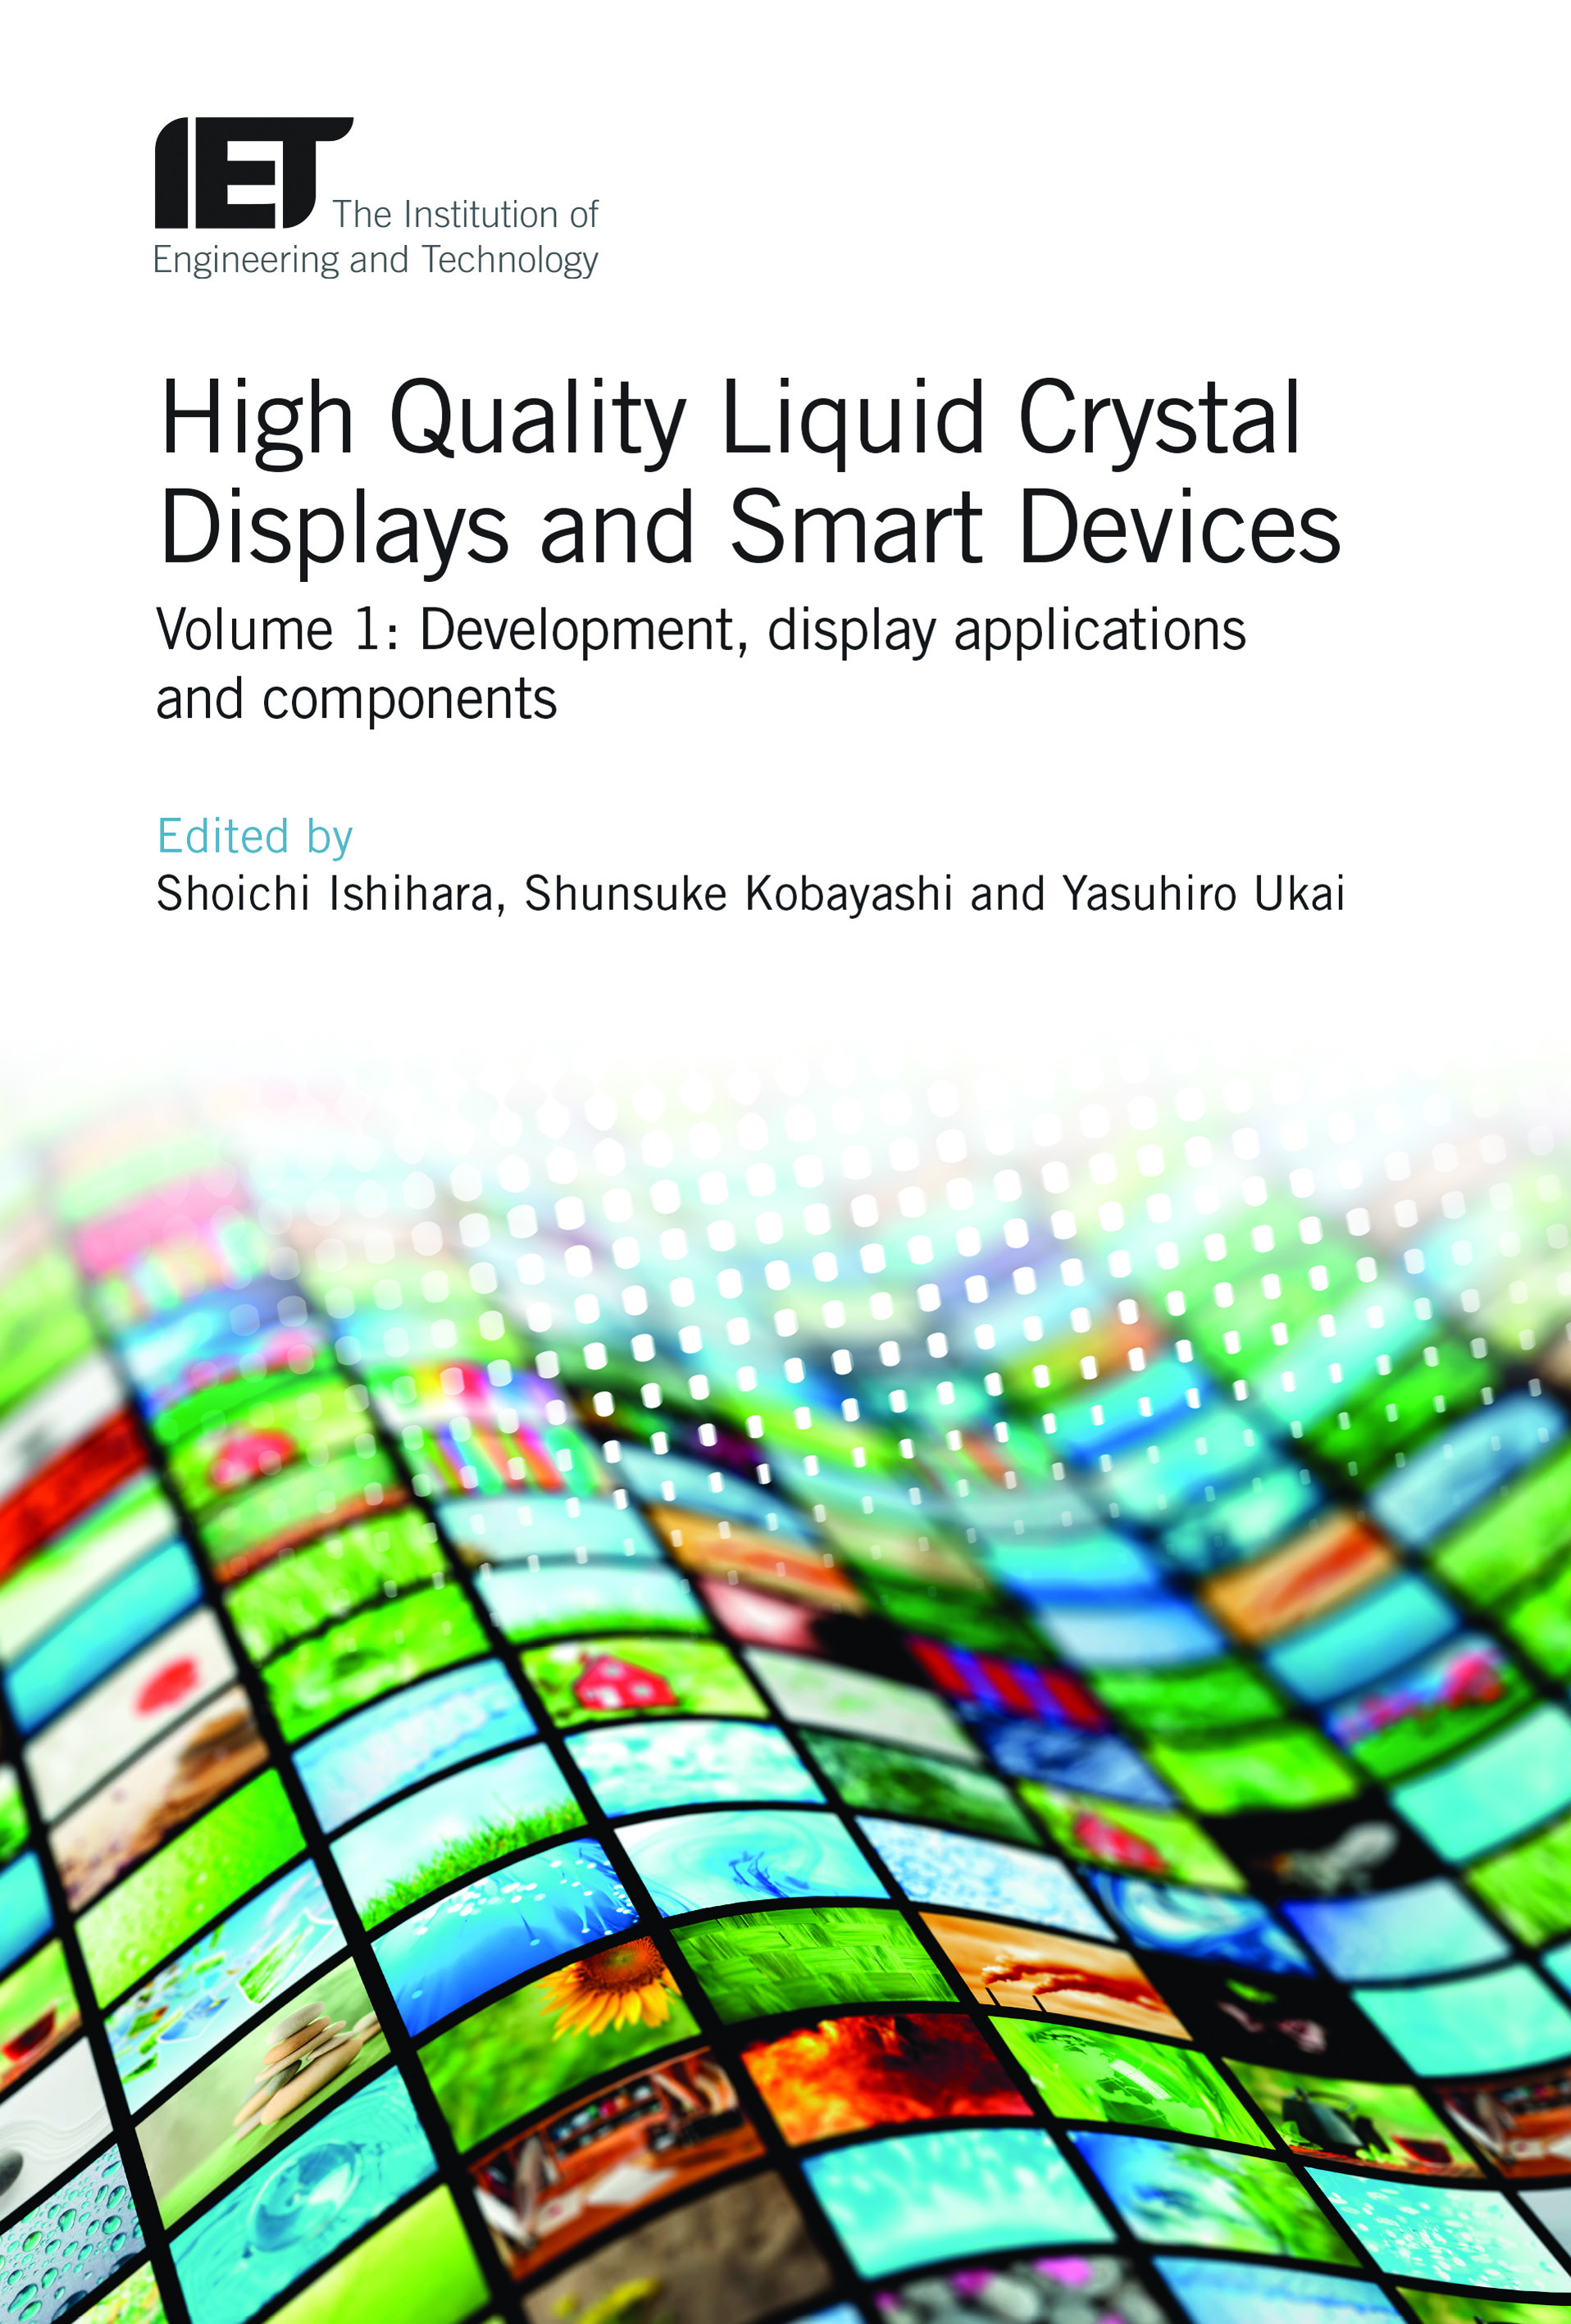 High Quality Liquid Crystal Displays and Smart Devices, Volume 1: Development, display applications and components